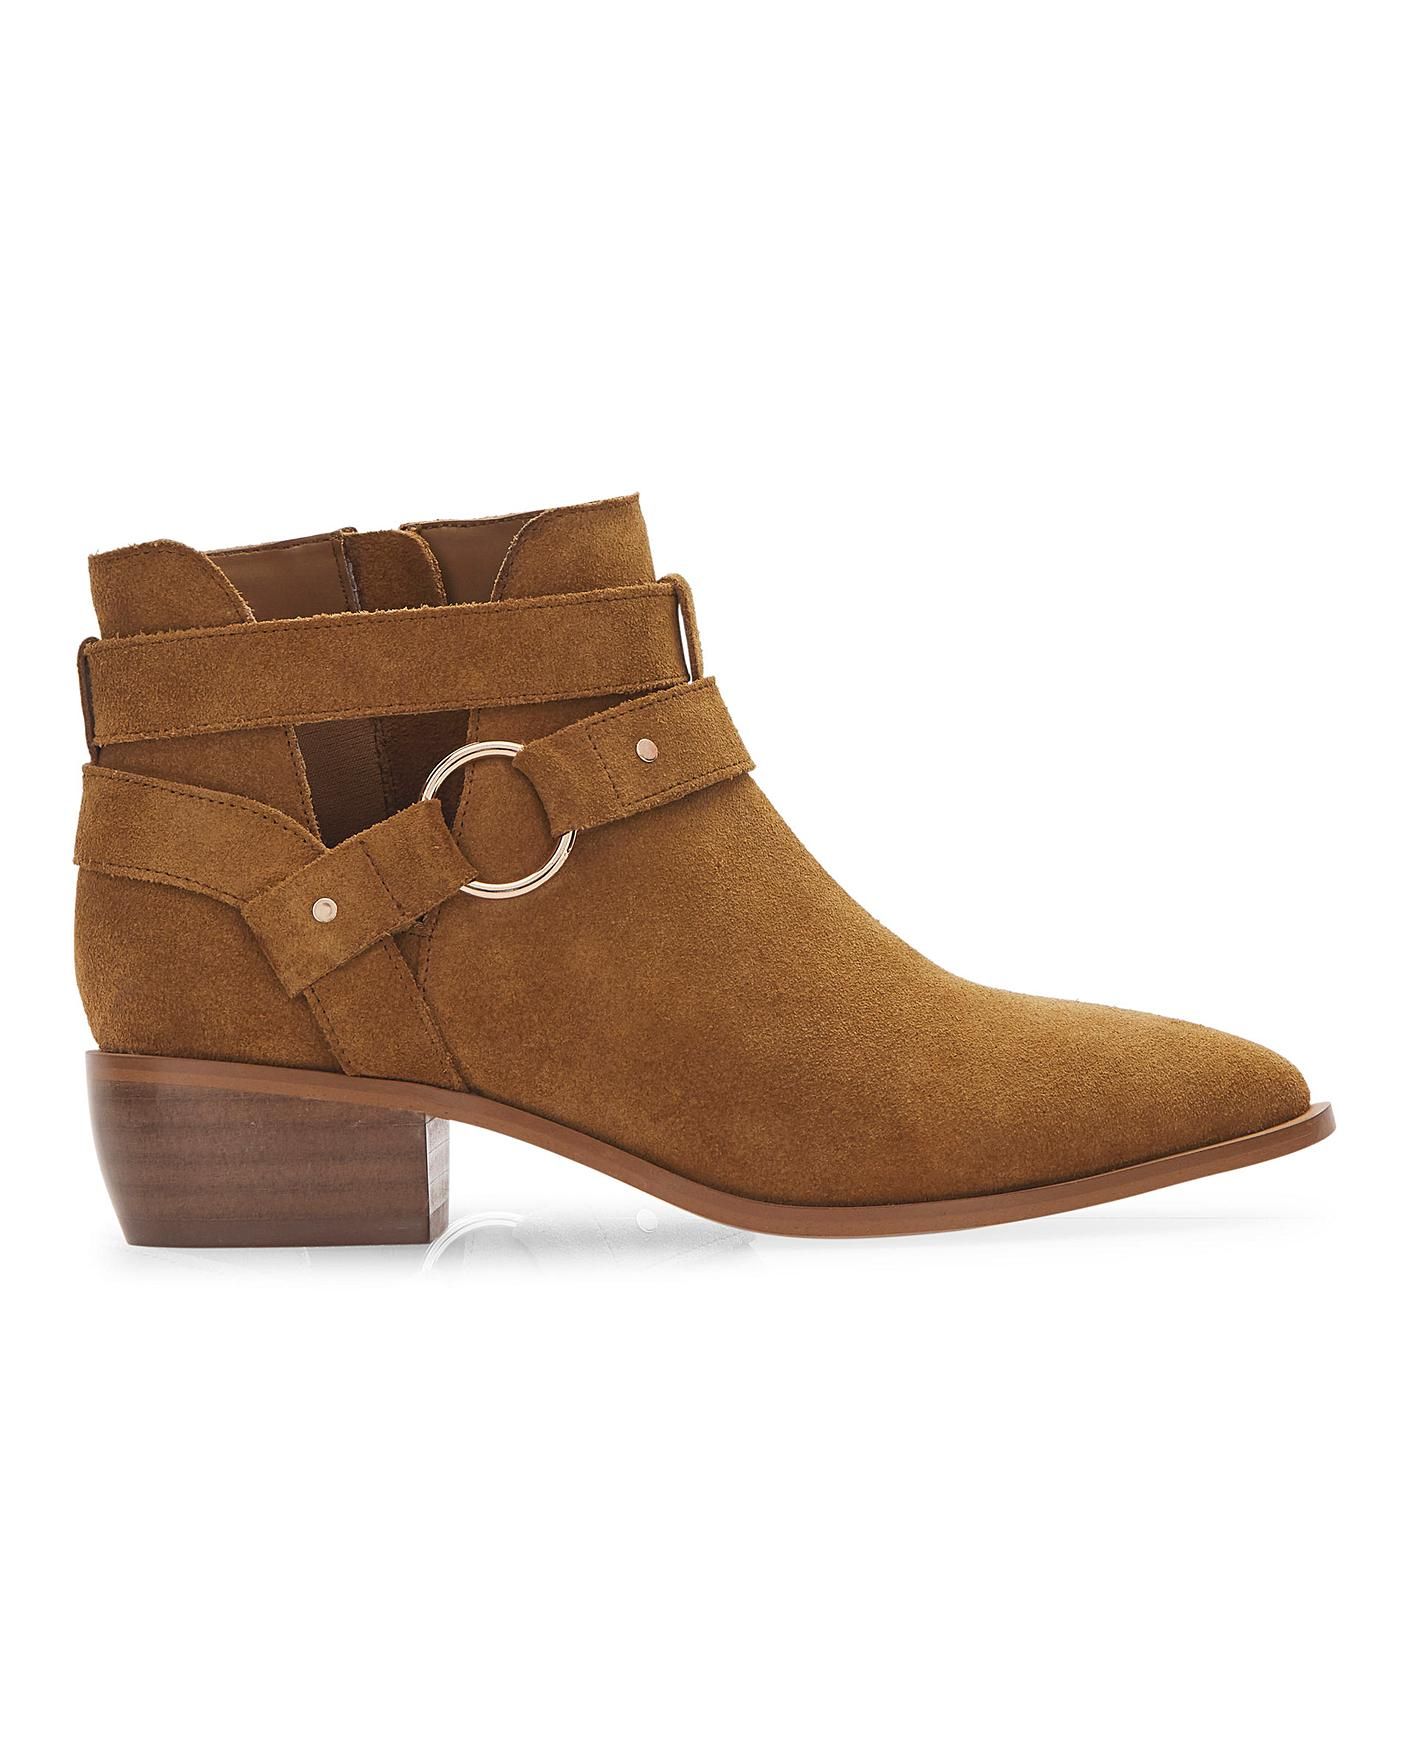 Aspen Suede Western Ankle Boots Wide Fit | Simply Be (UK)